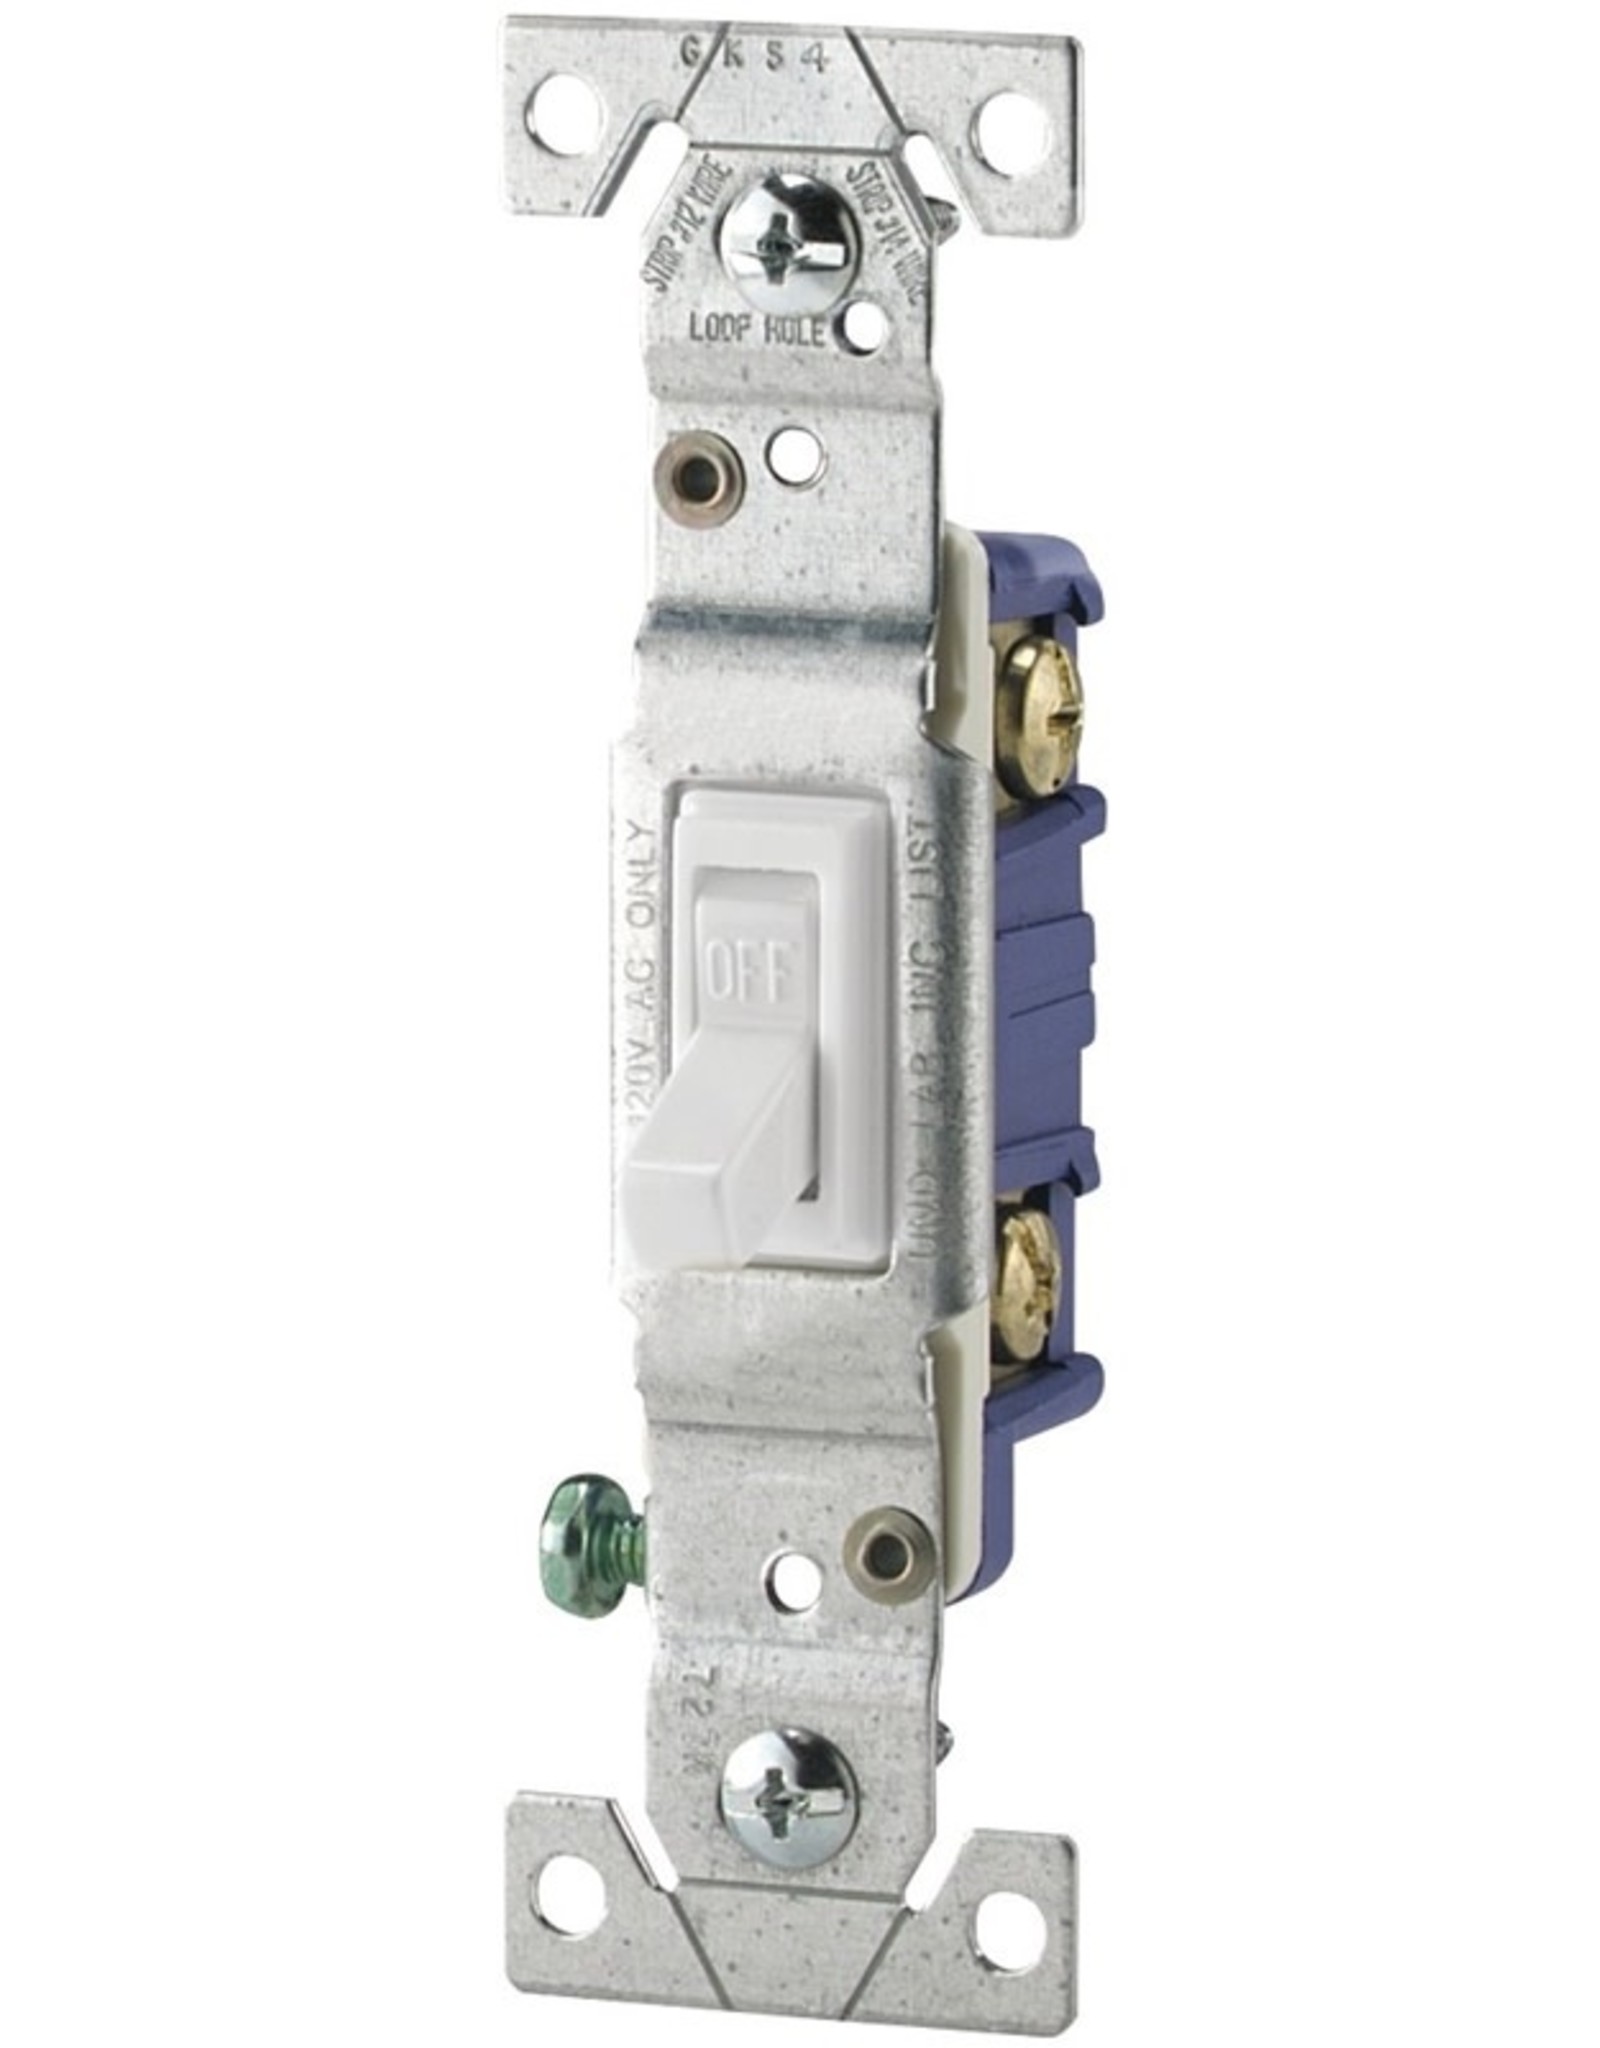 Eaton Eaton Wiring Devices 1301-7W Toggle Switch, 15 A, 120 V, Polycarbonate Housing Material, White